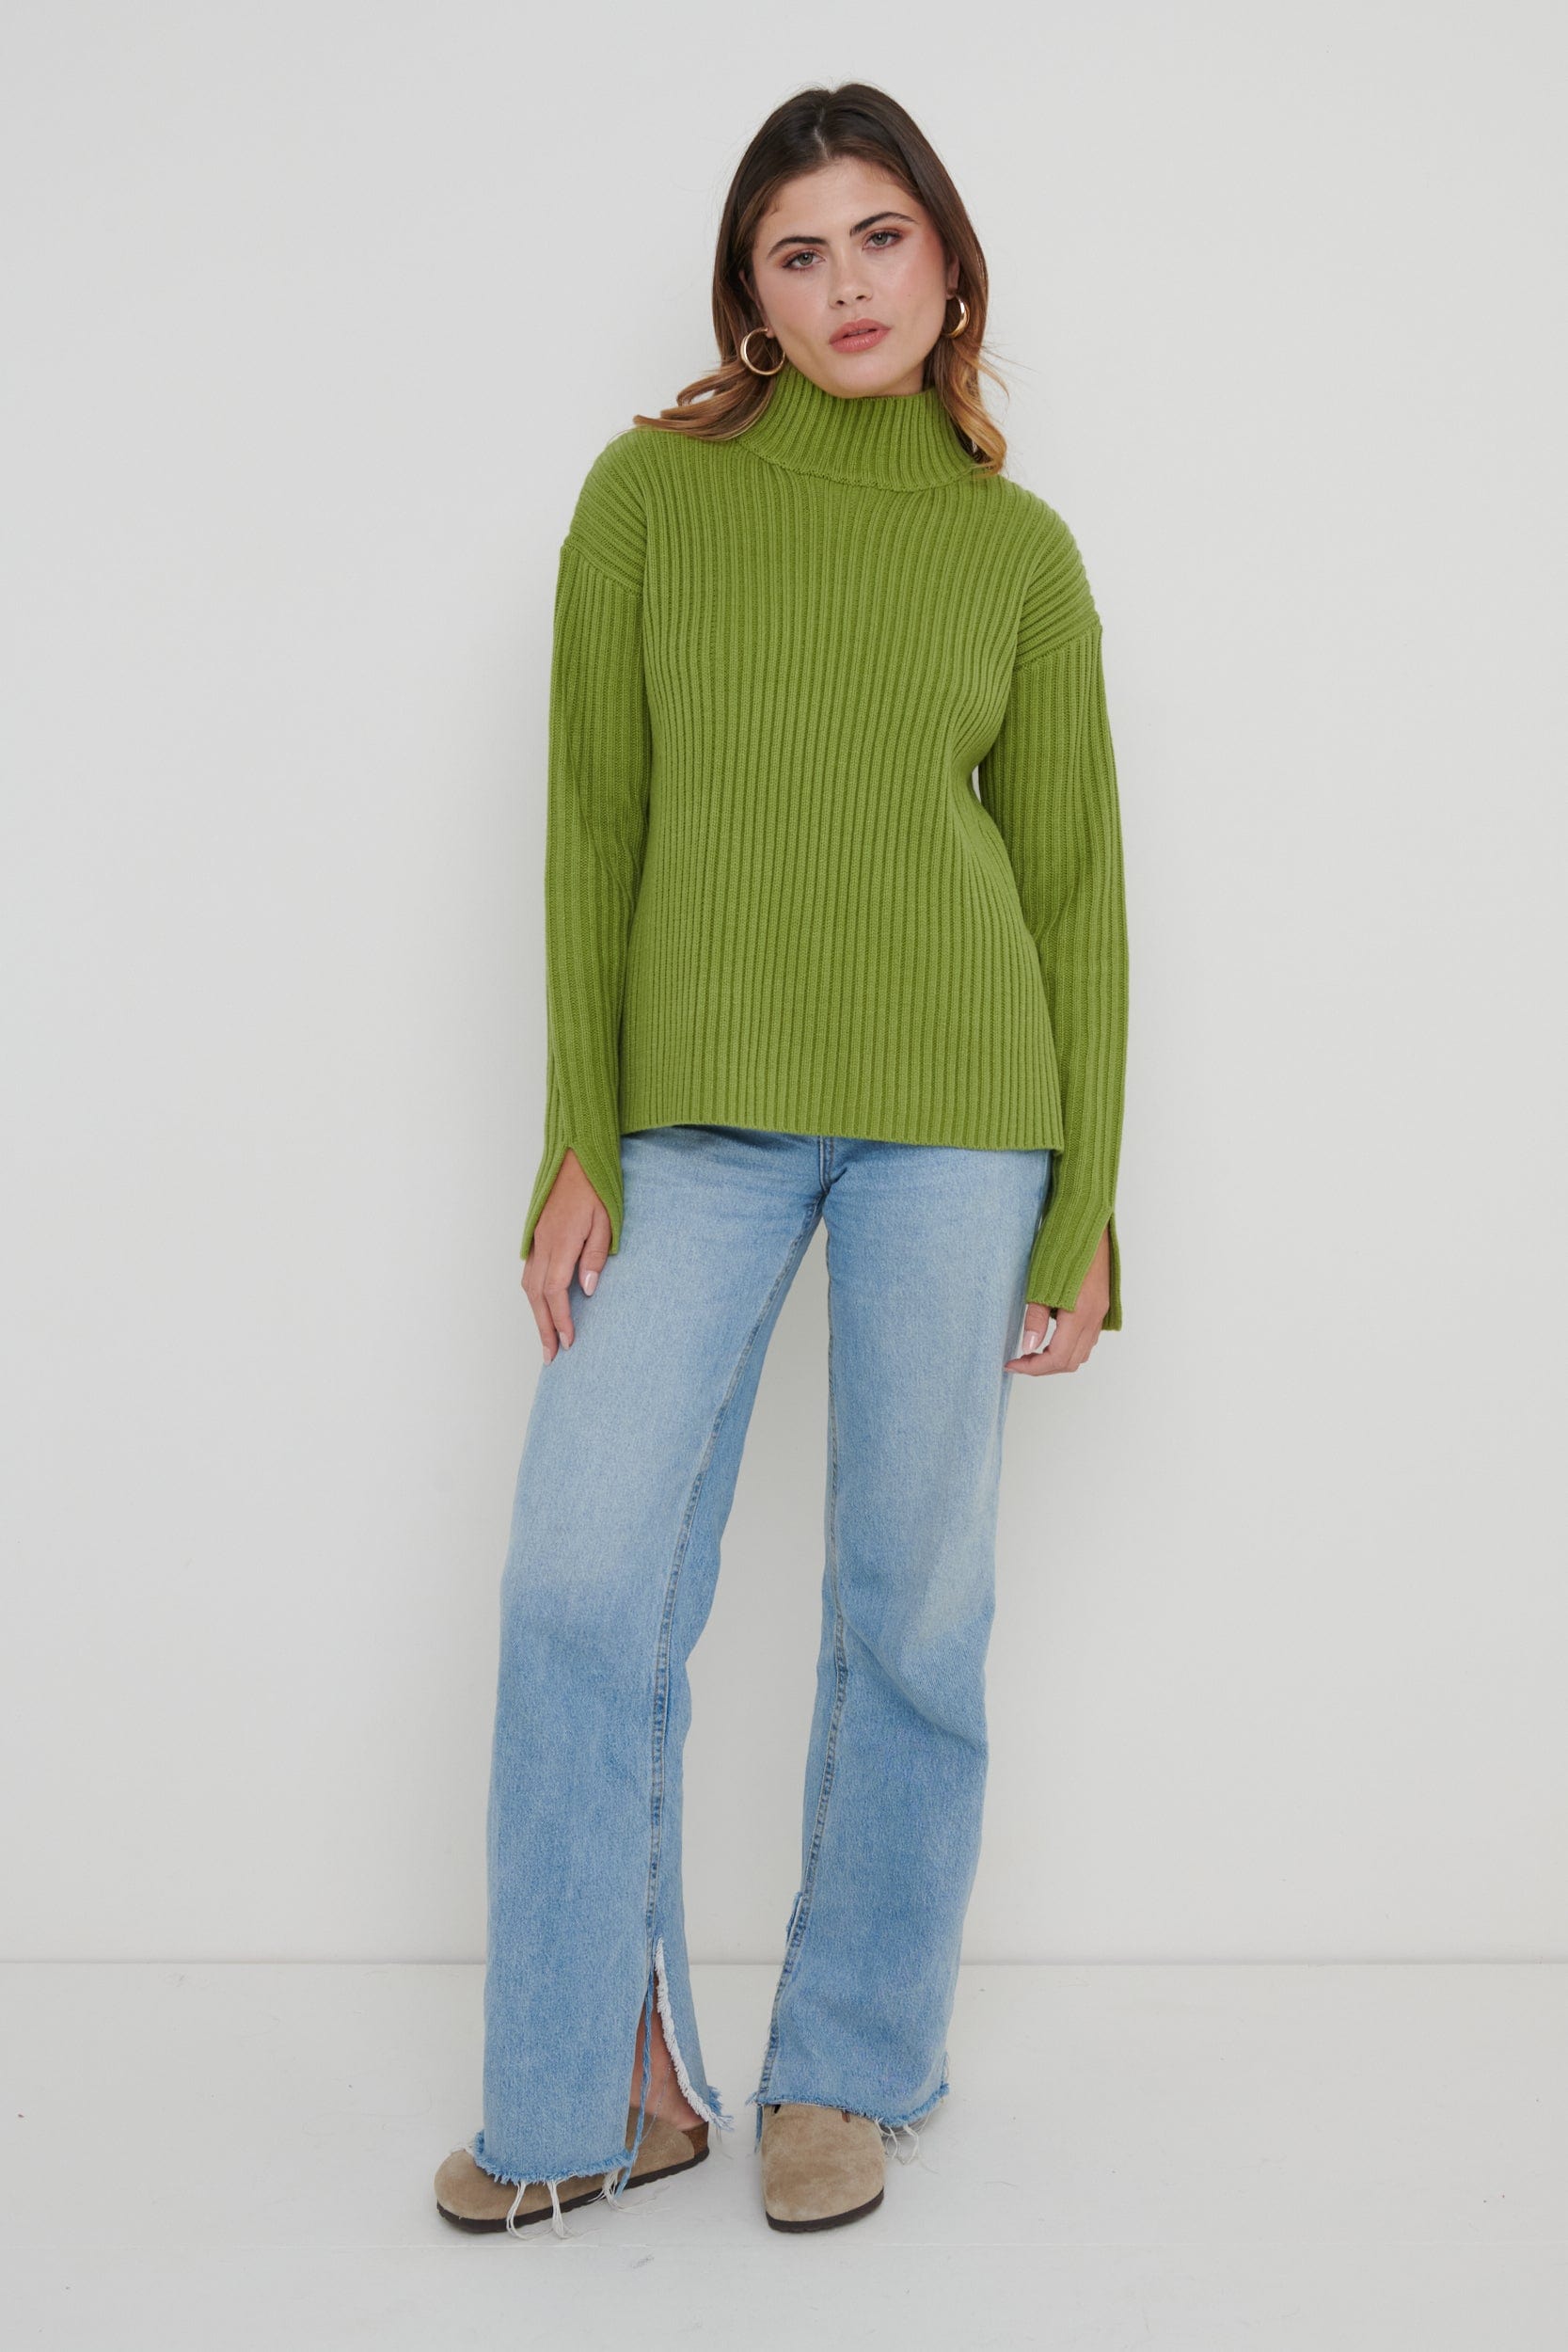 Connie Knit Jumper - Green, S